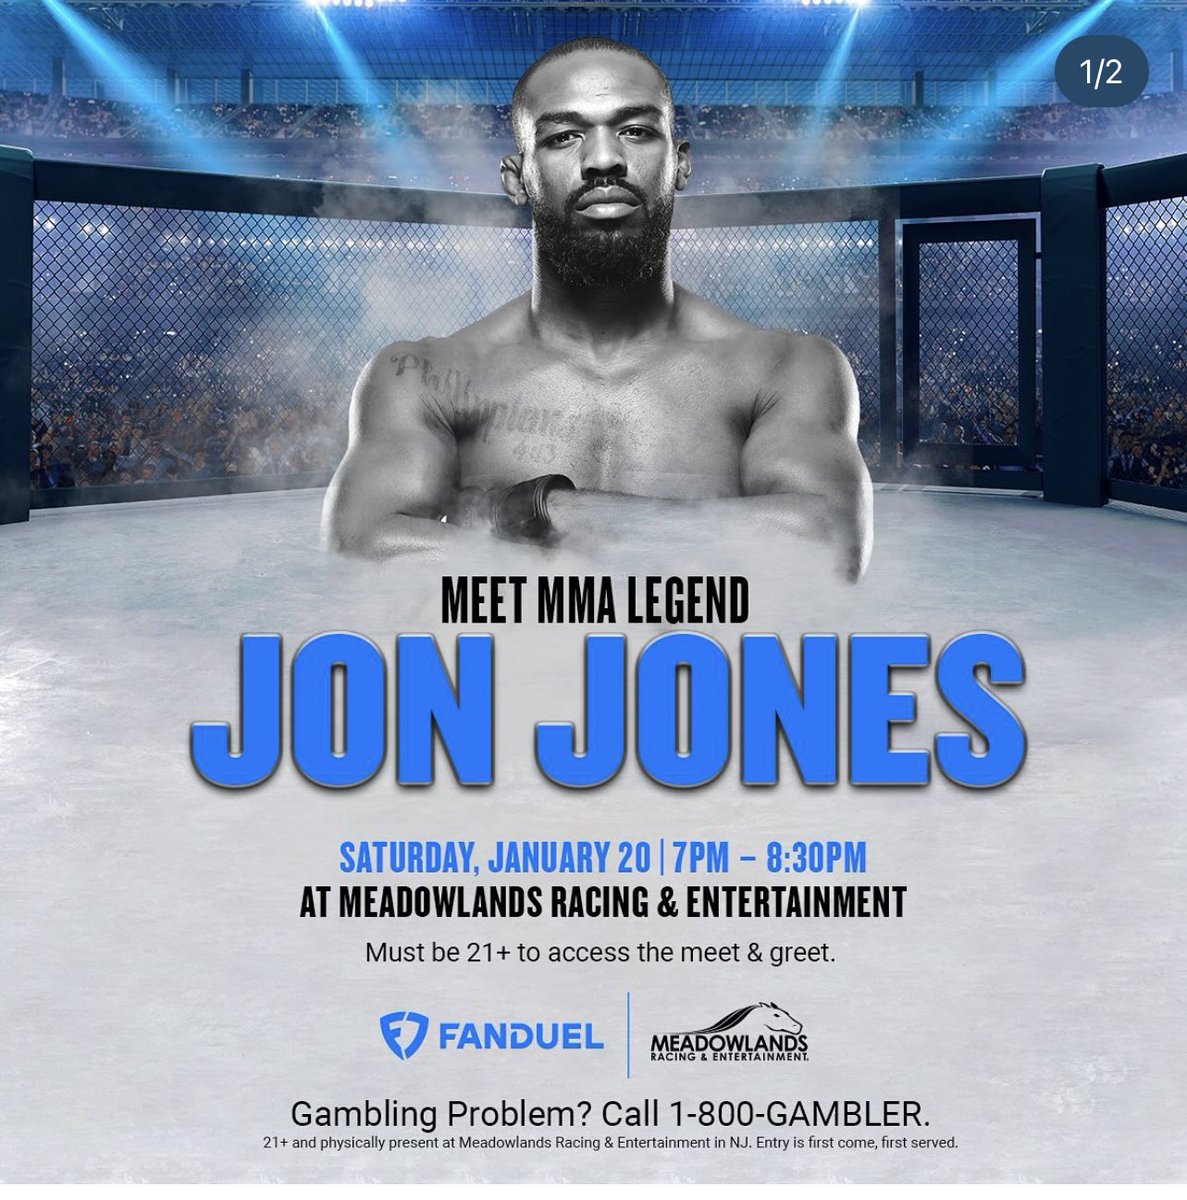 @JonnyBones I’ll be there. Details for who needs